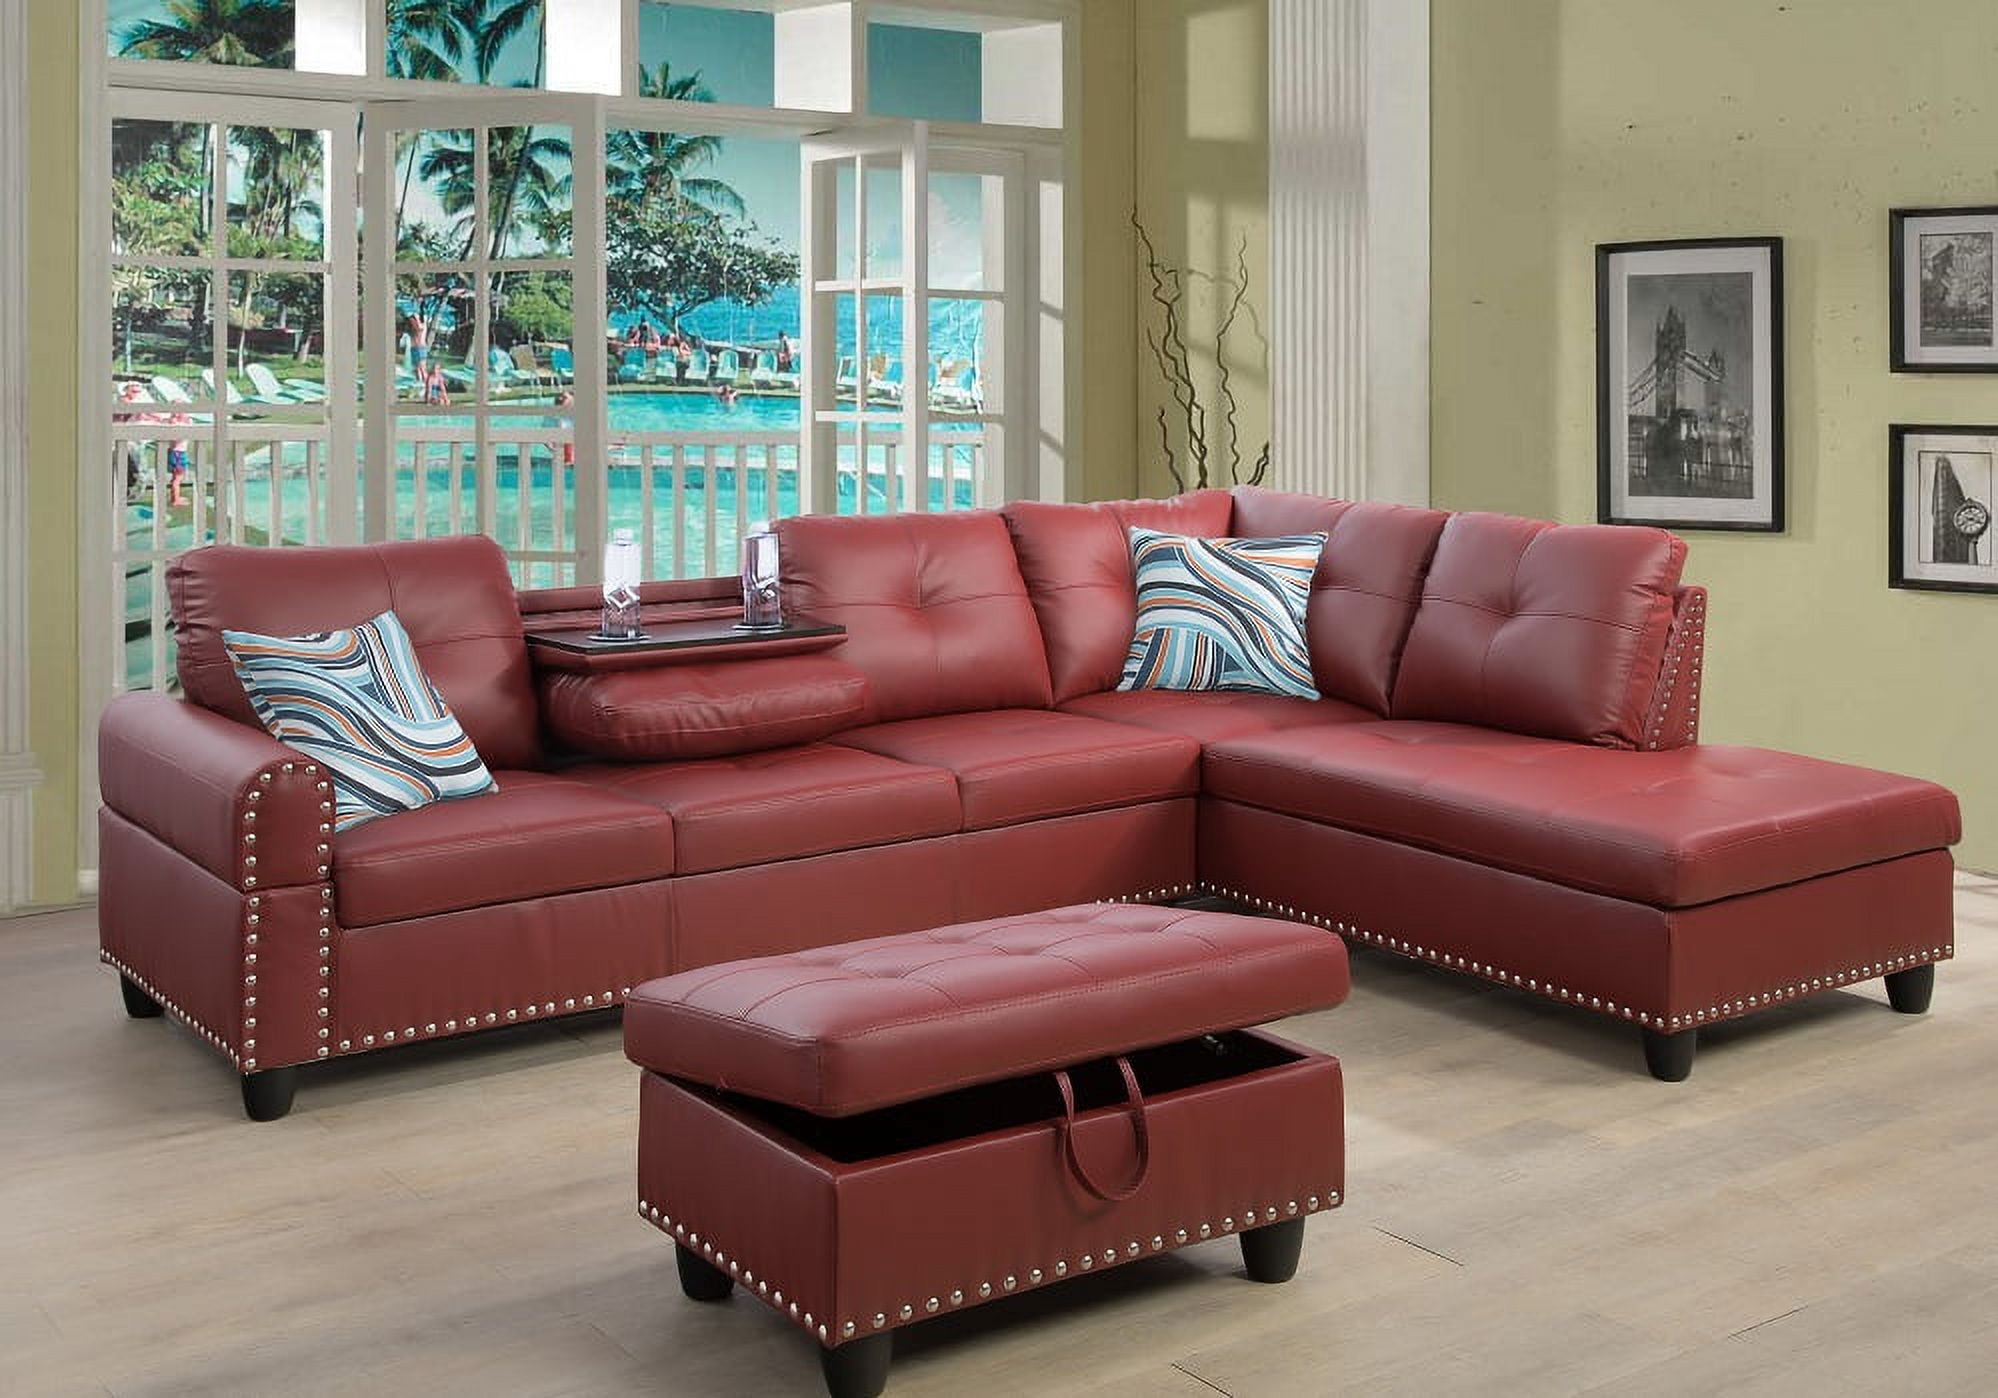 Ponliving Furniture Room Sectional Set Leather Sofa In Home With Storage Ottoman And Matching Pillows Right Hand Facing Red Com